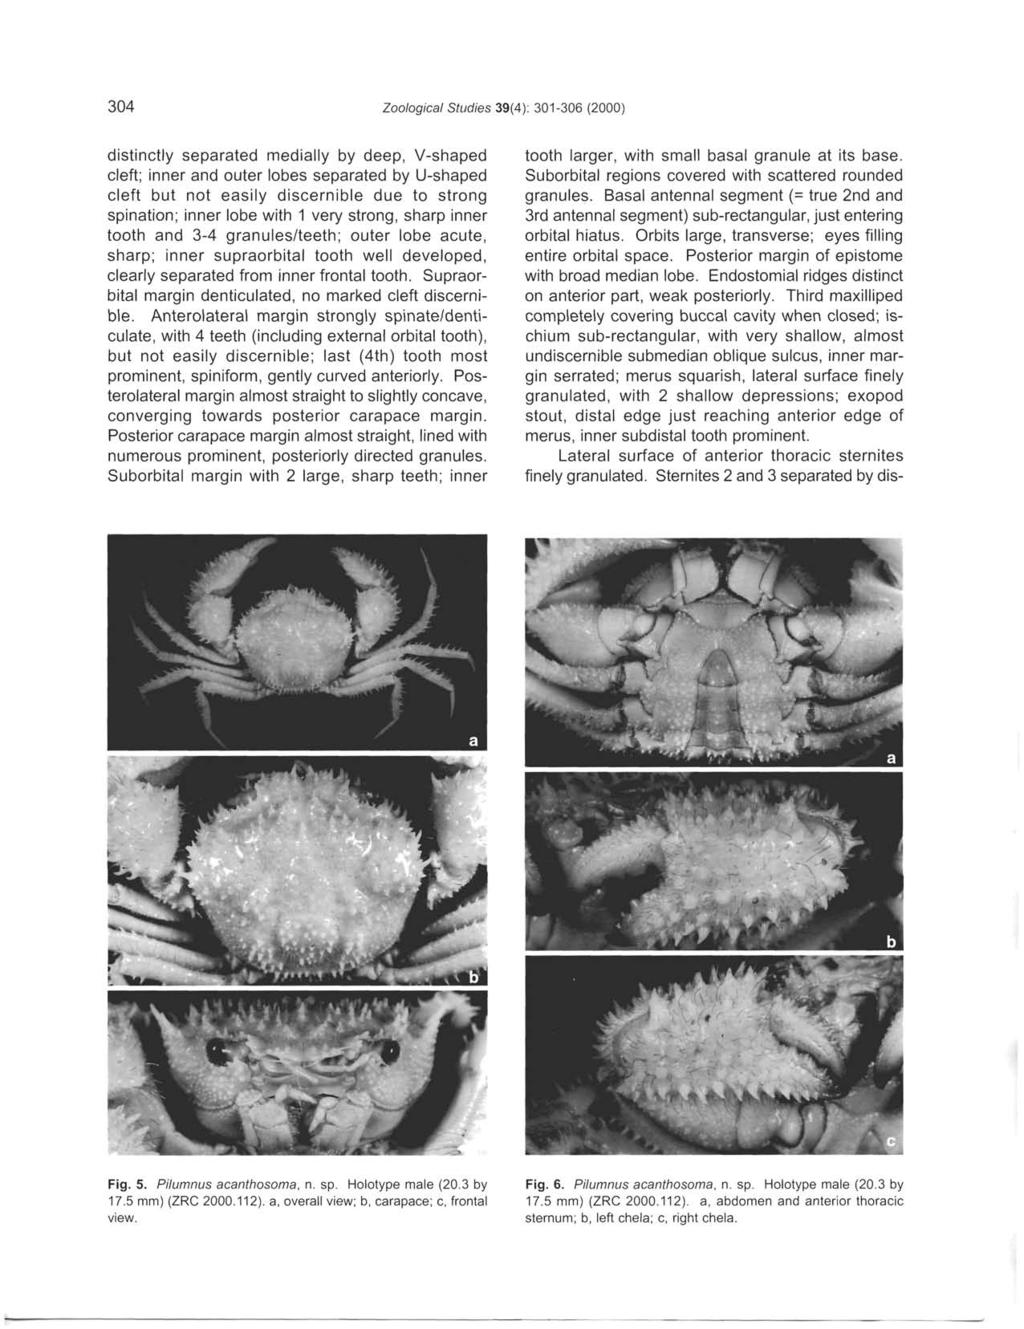 304 Zoological Studies 39(4): 301-306 (2000) distinctly separated medially by deep, V-shaped cleft; inner and outer lobes separated by U-shaped cleft but not easily discernible due to strong